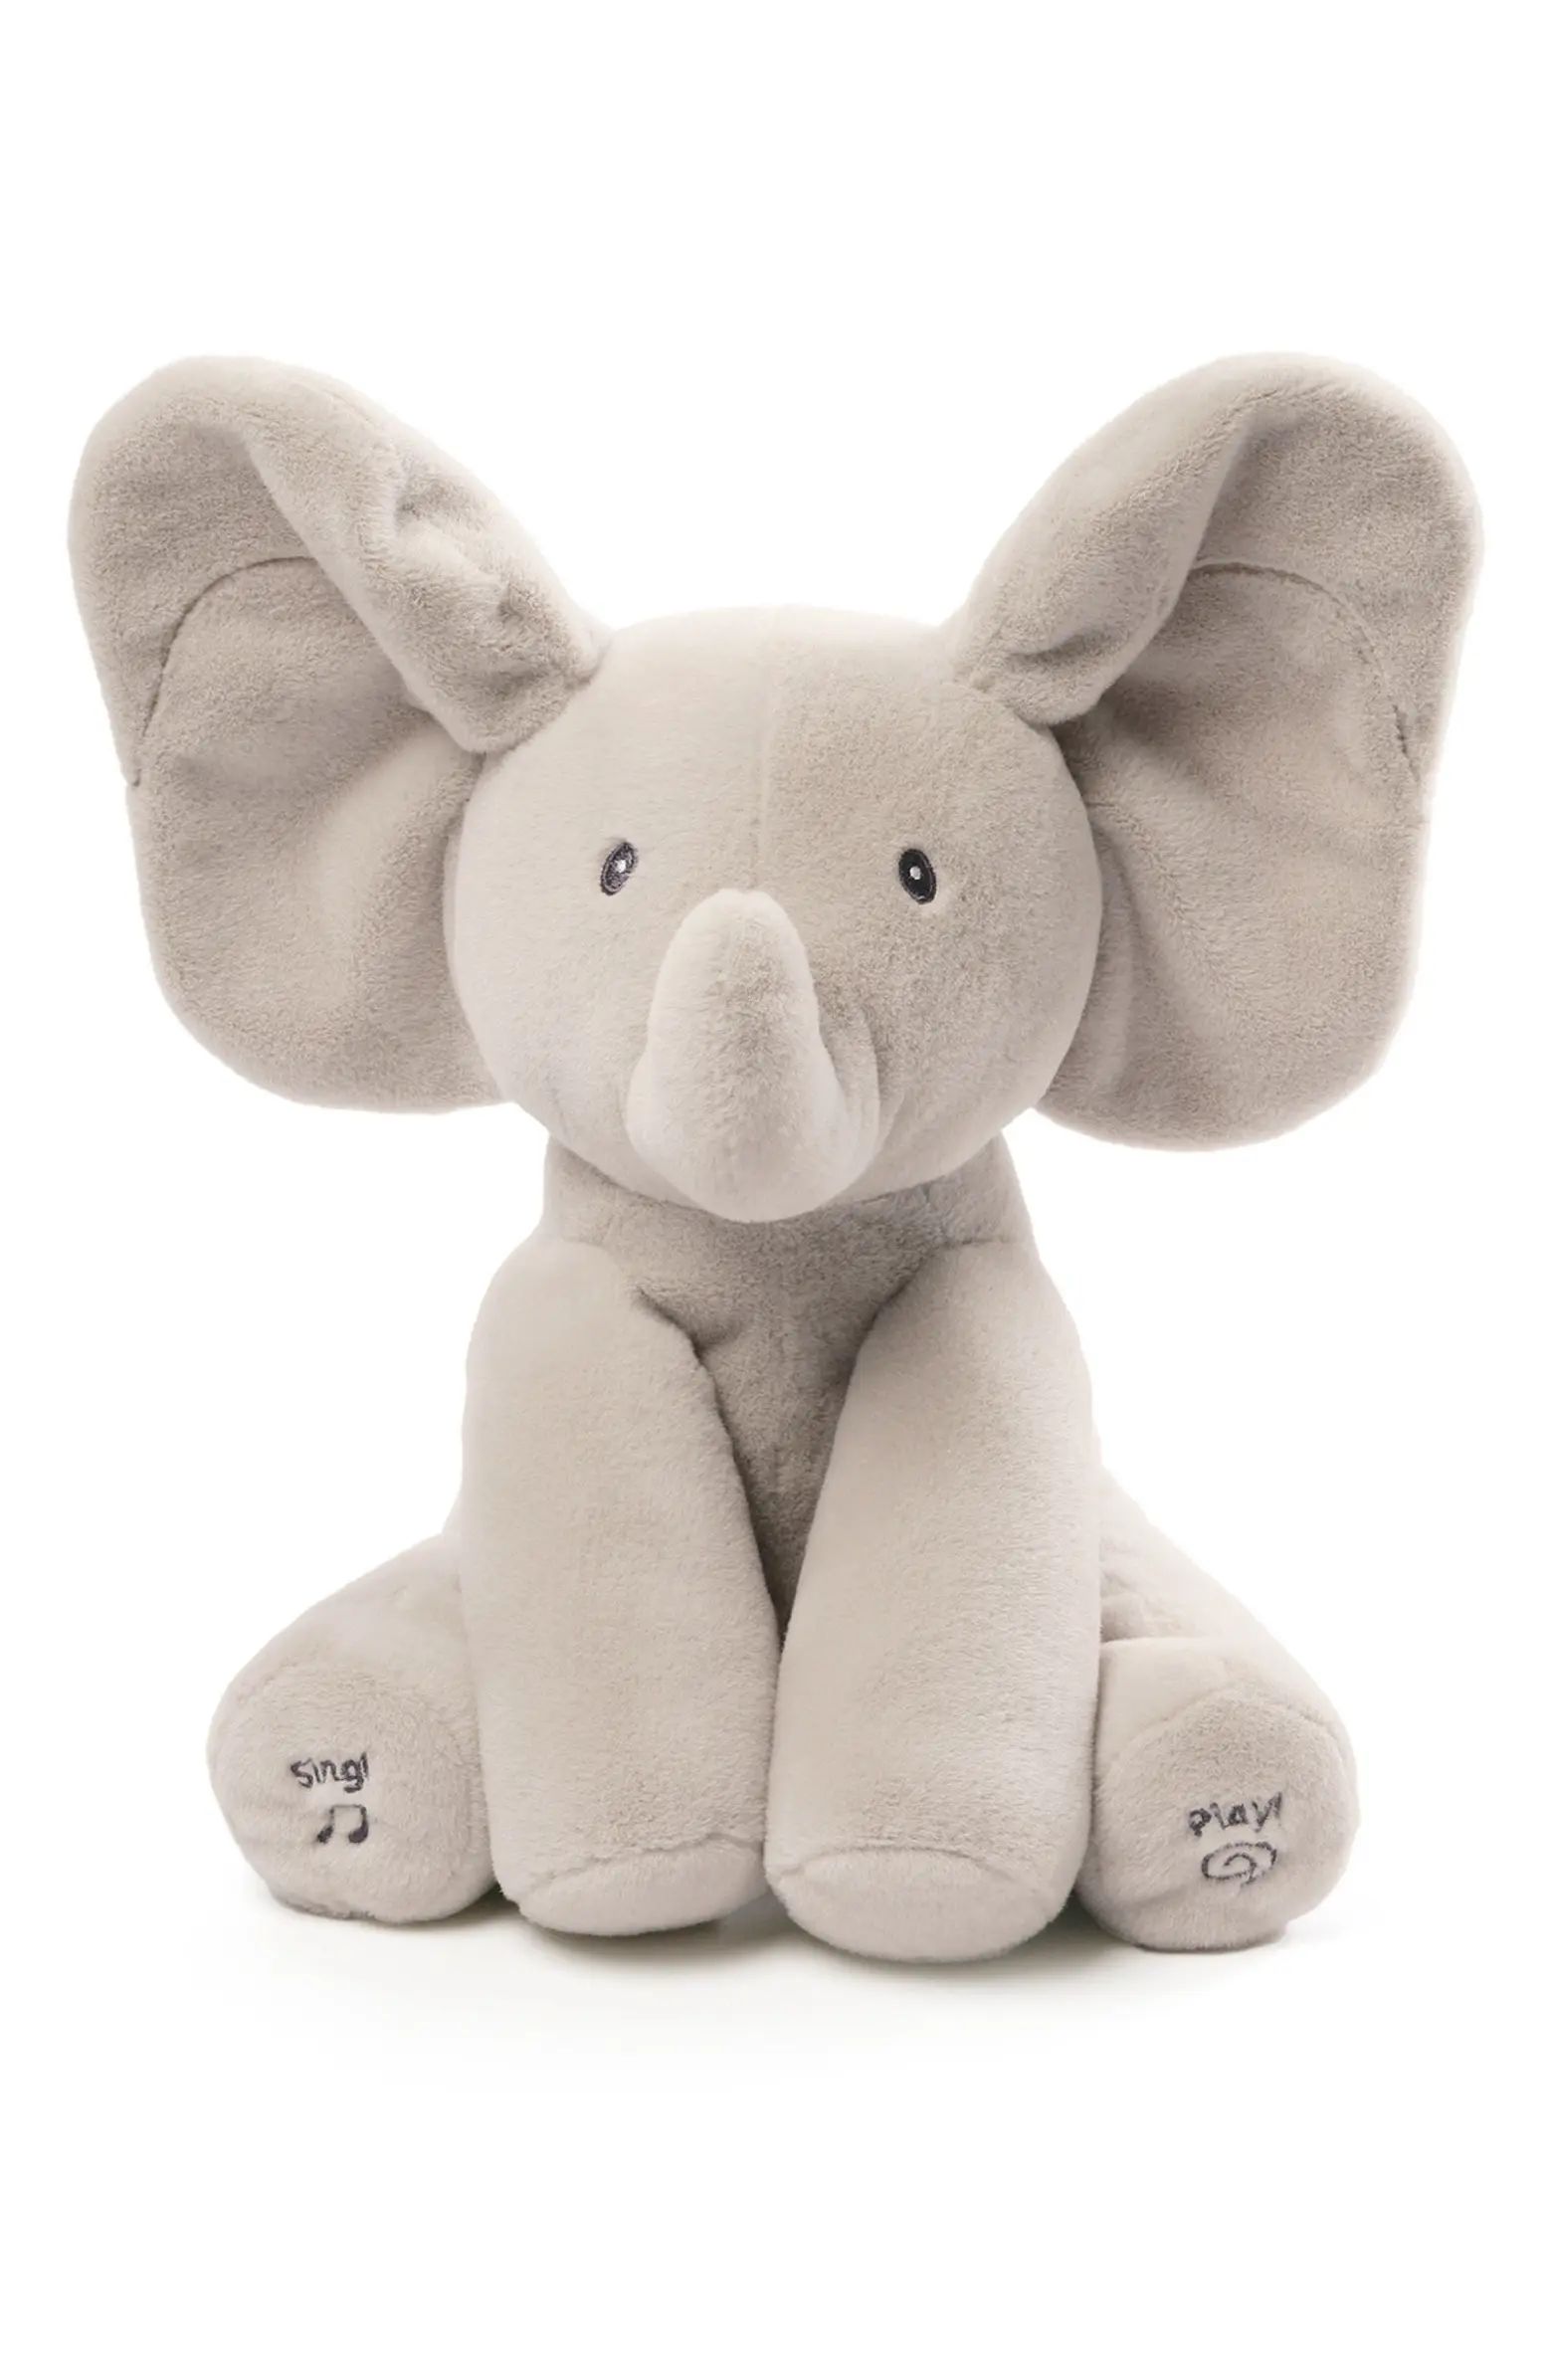 Baby Gund Flappy The Elephant Musical Stuffed Animal | Nordstrom